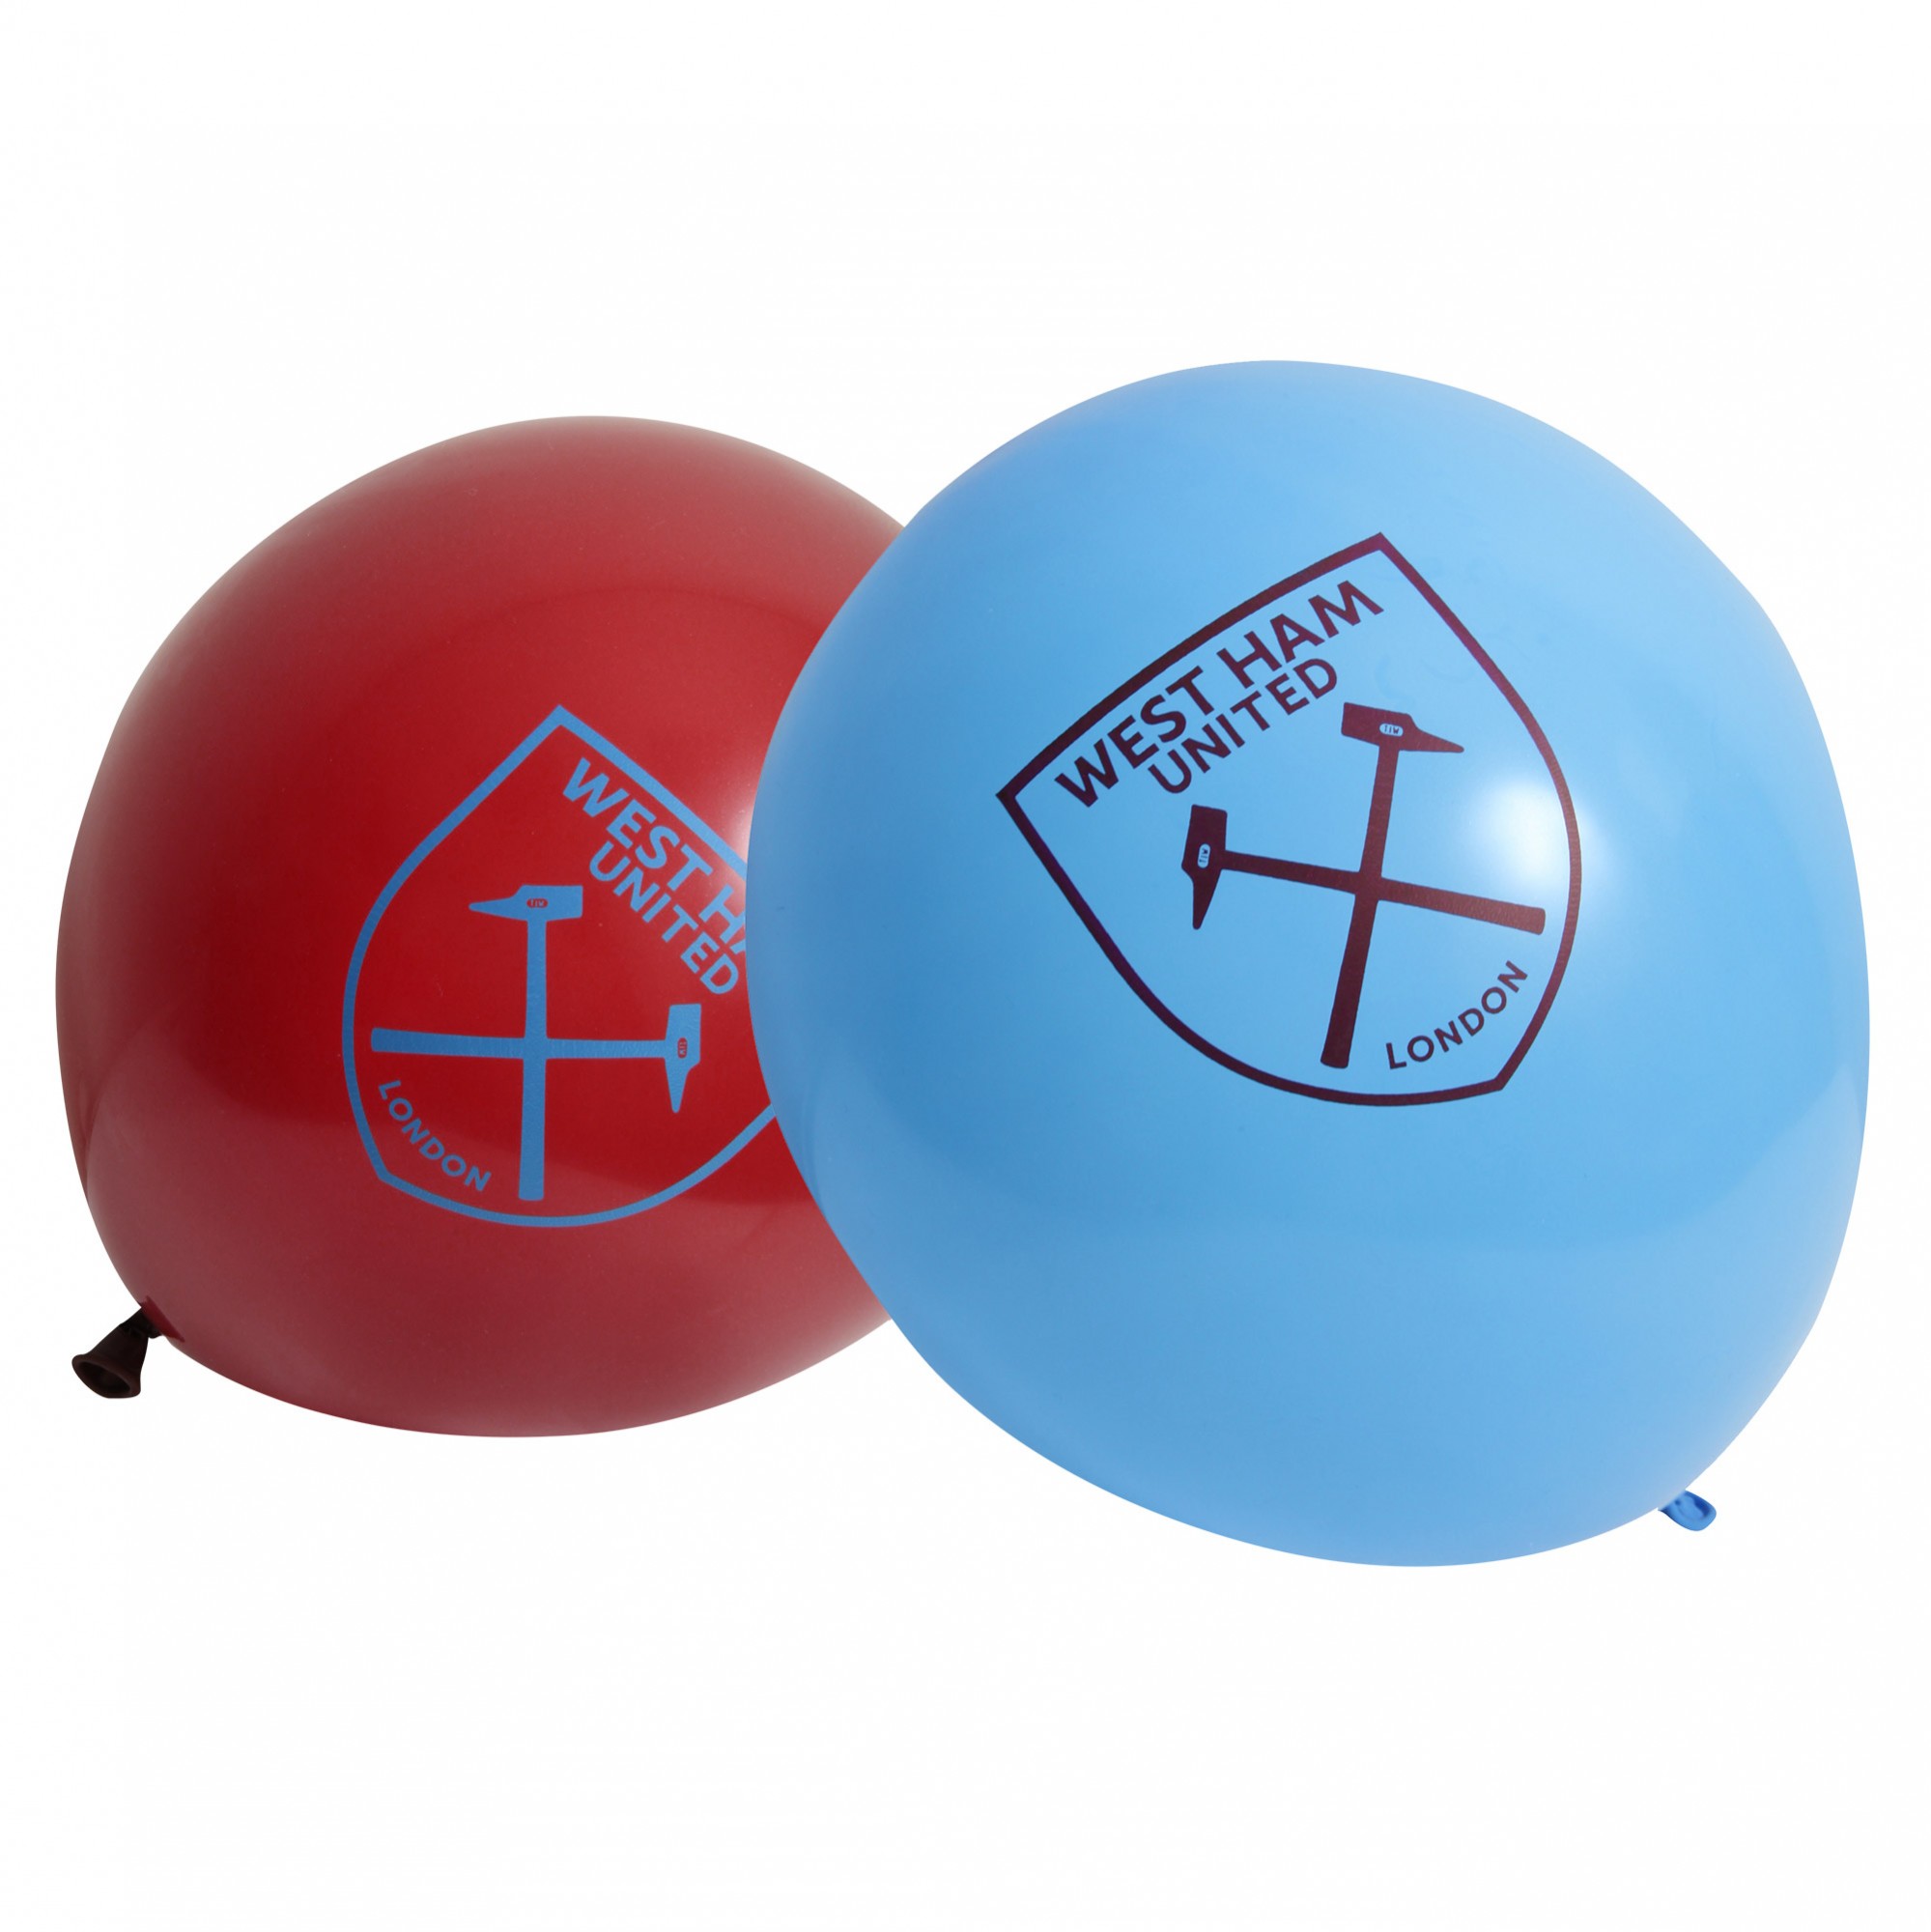 Claret And Blue Balloons